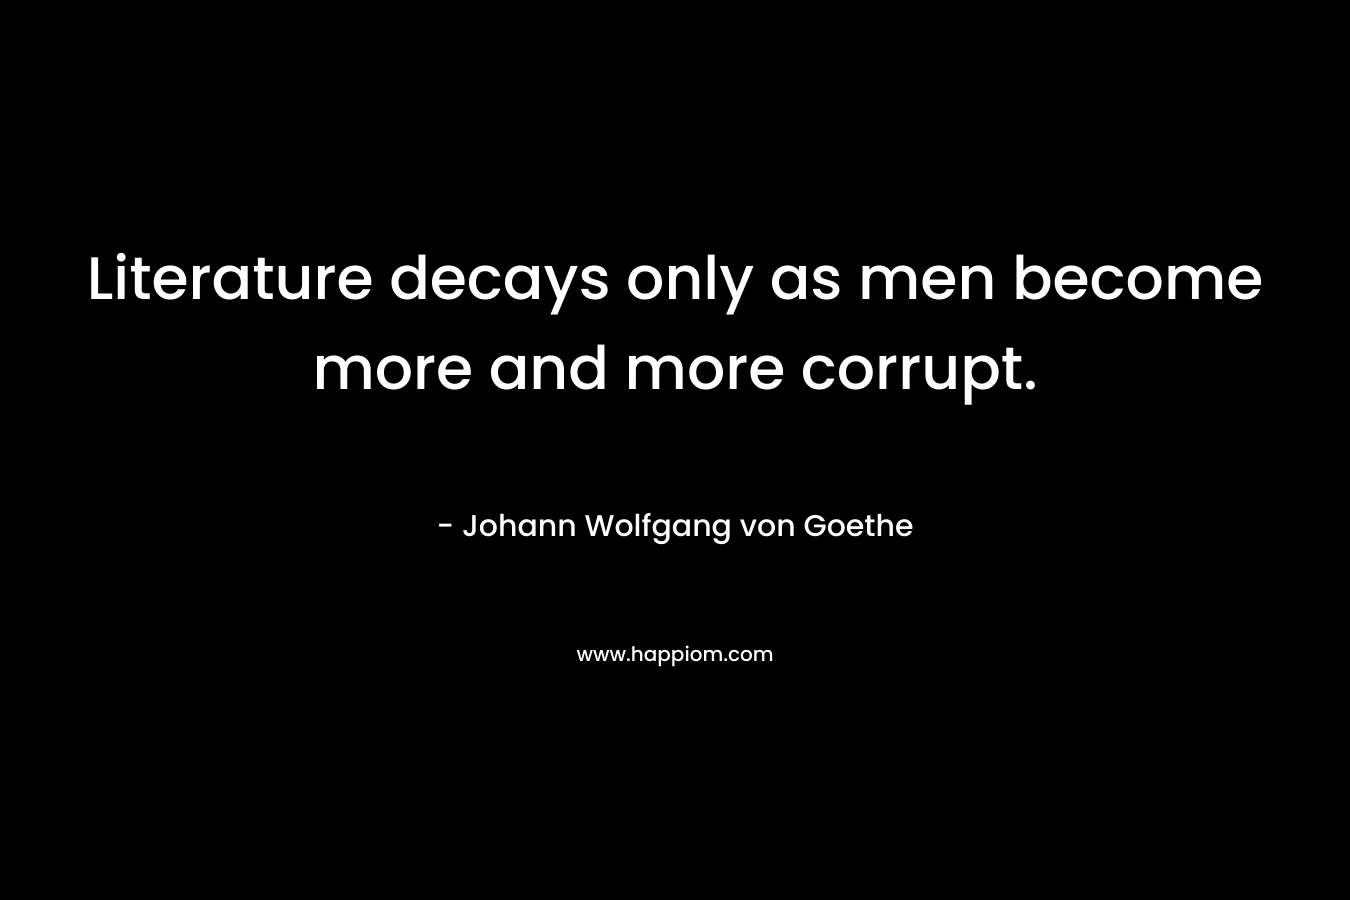 Literature decays only as men become more and more corrupt.